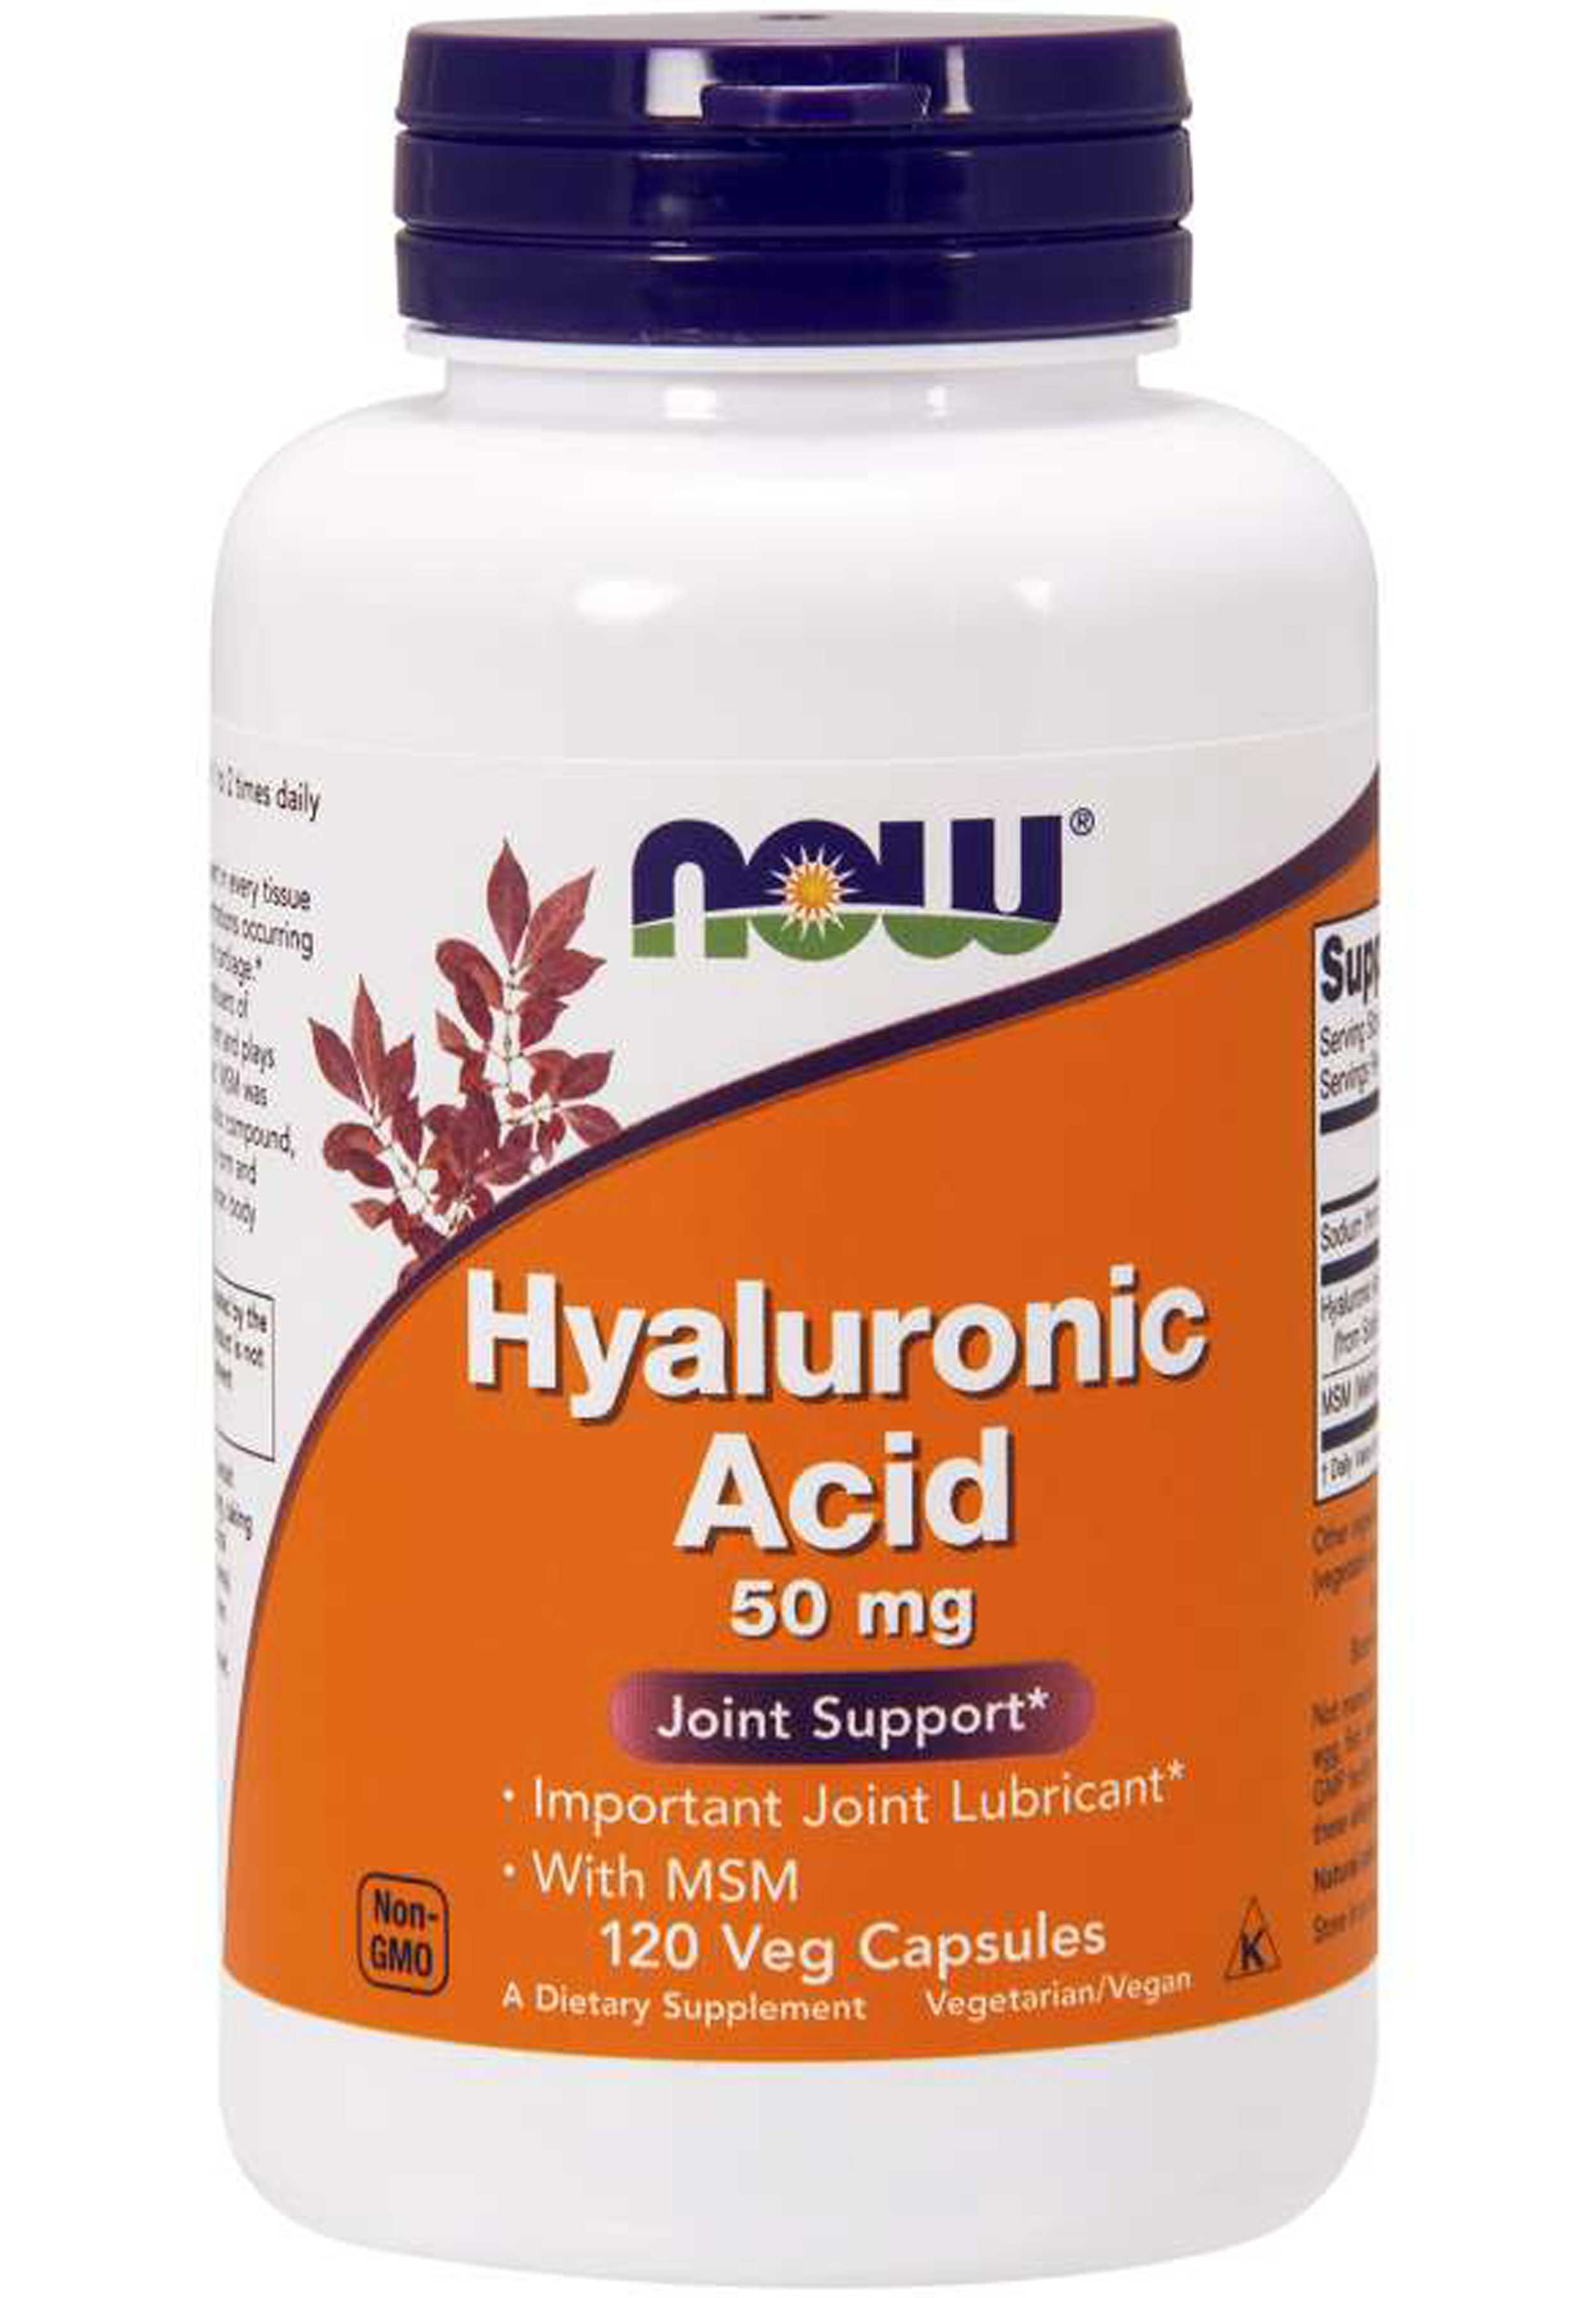 NOW Hyaluronic Acid with MSM 50 mg